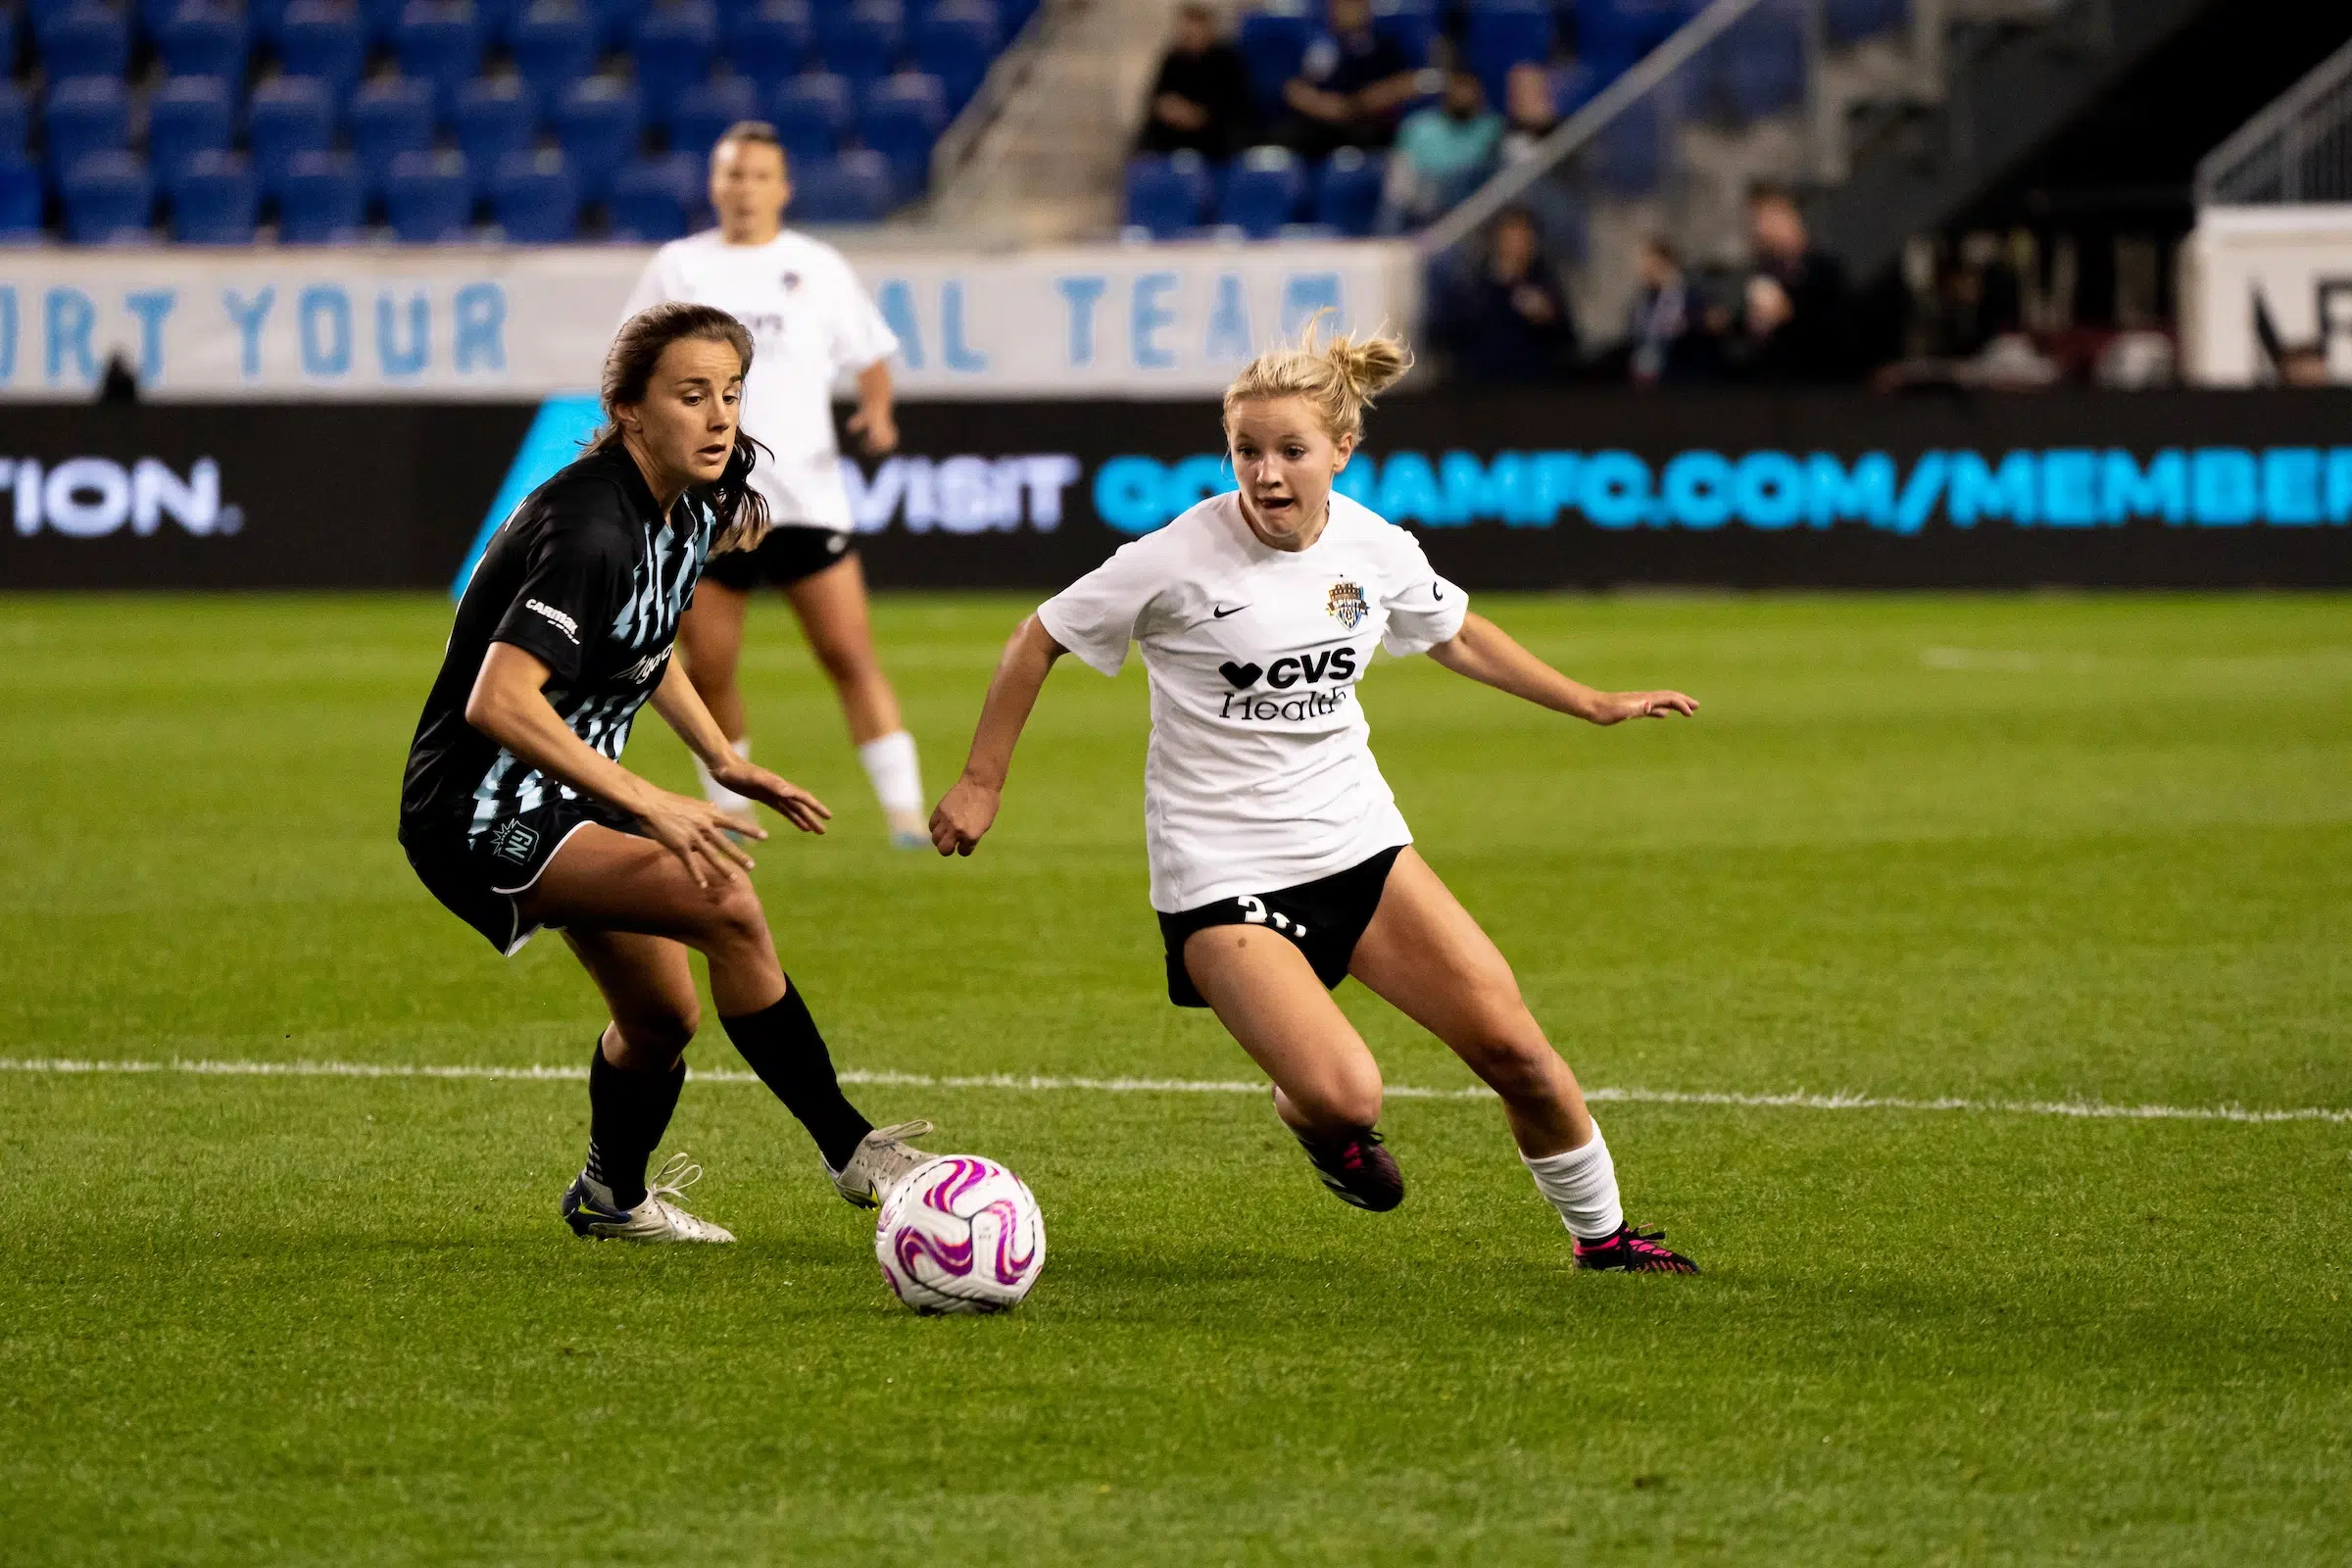 Chloe Ricketts in a white top, black shorts and white socks dribbles past a defender wearing a black uniform.